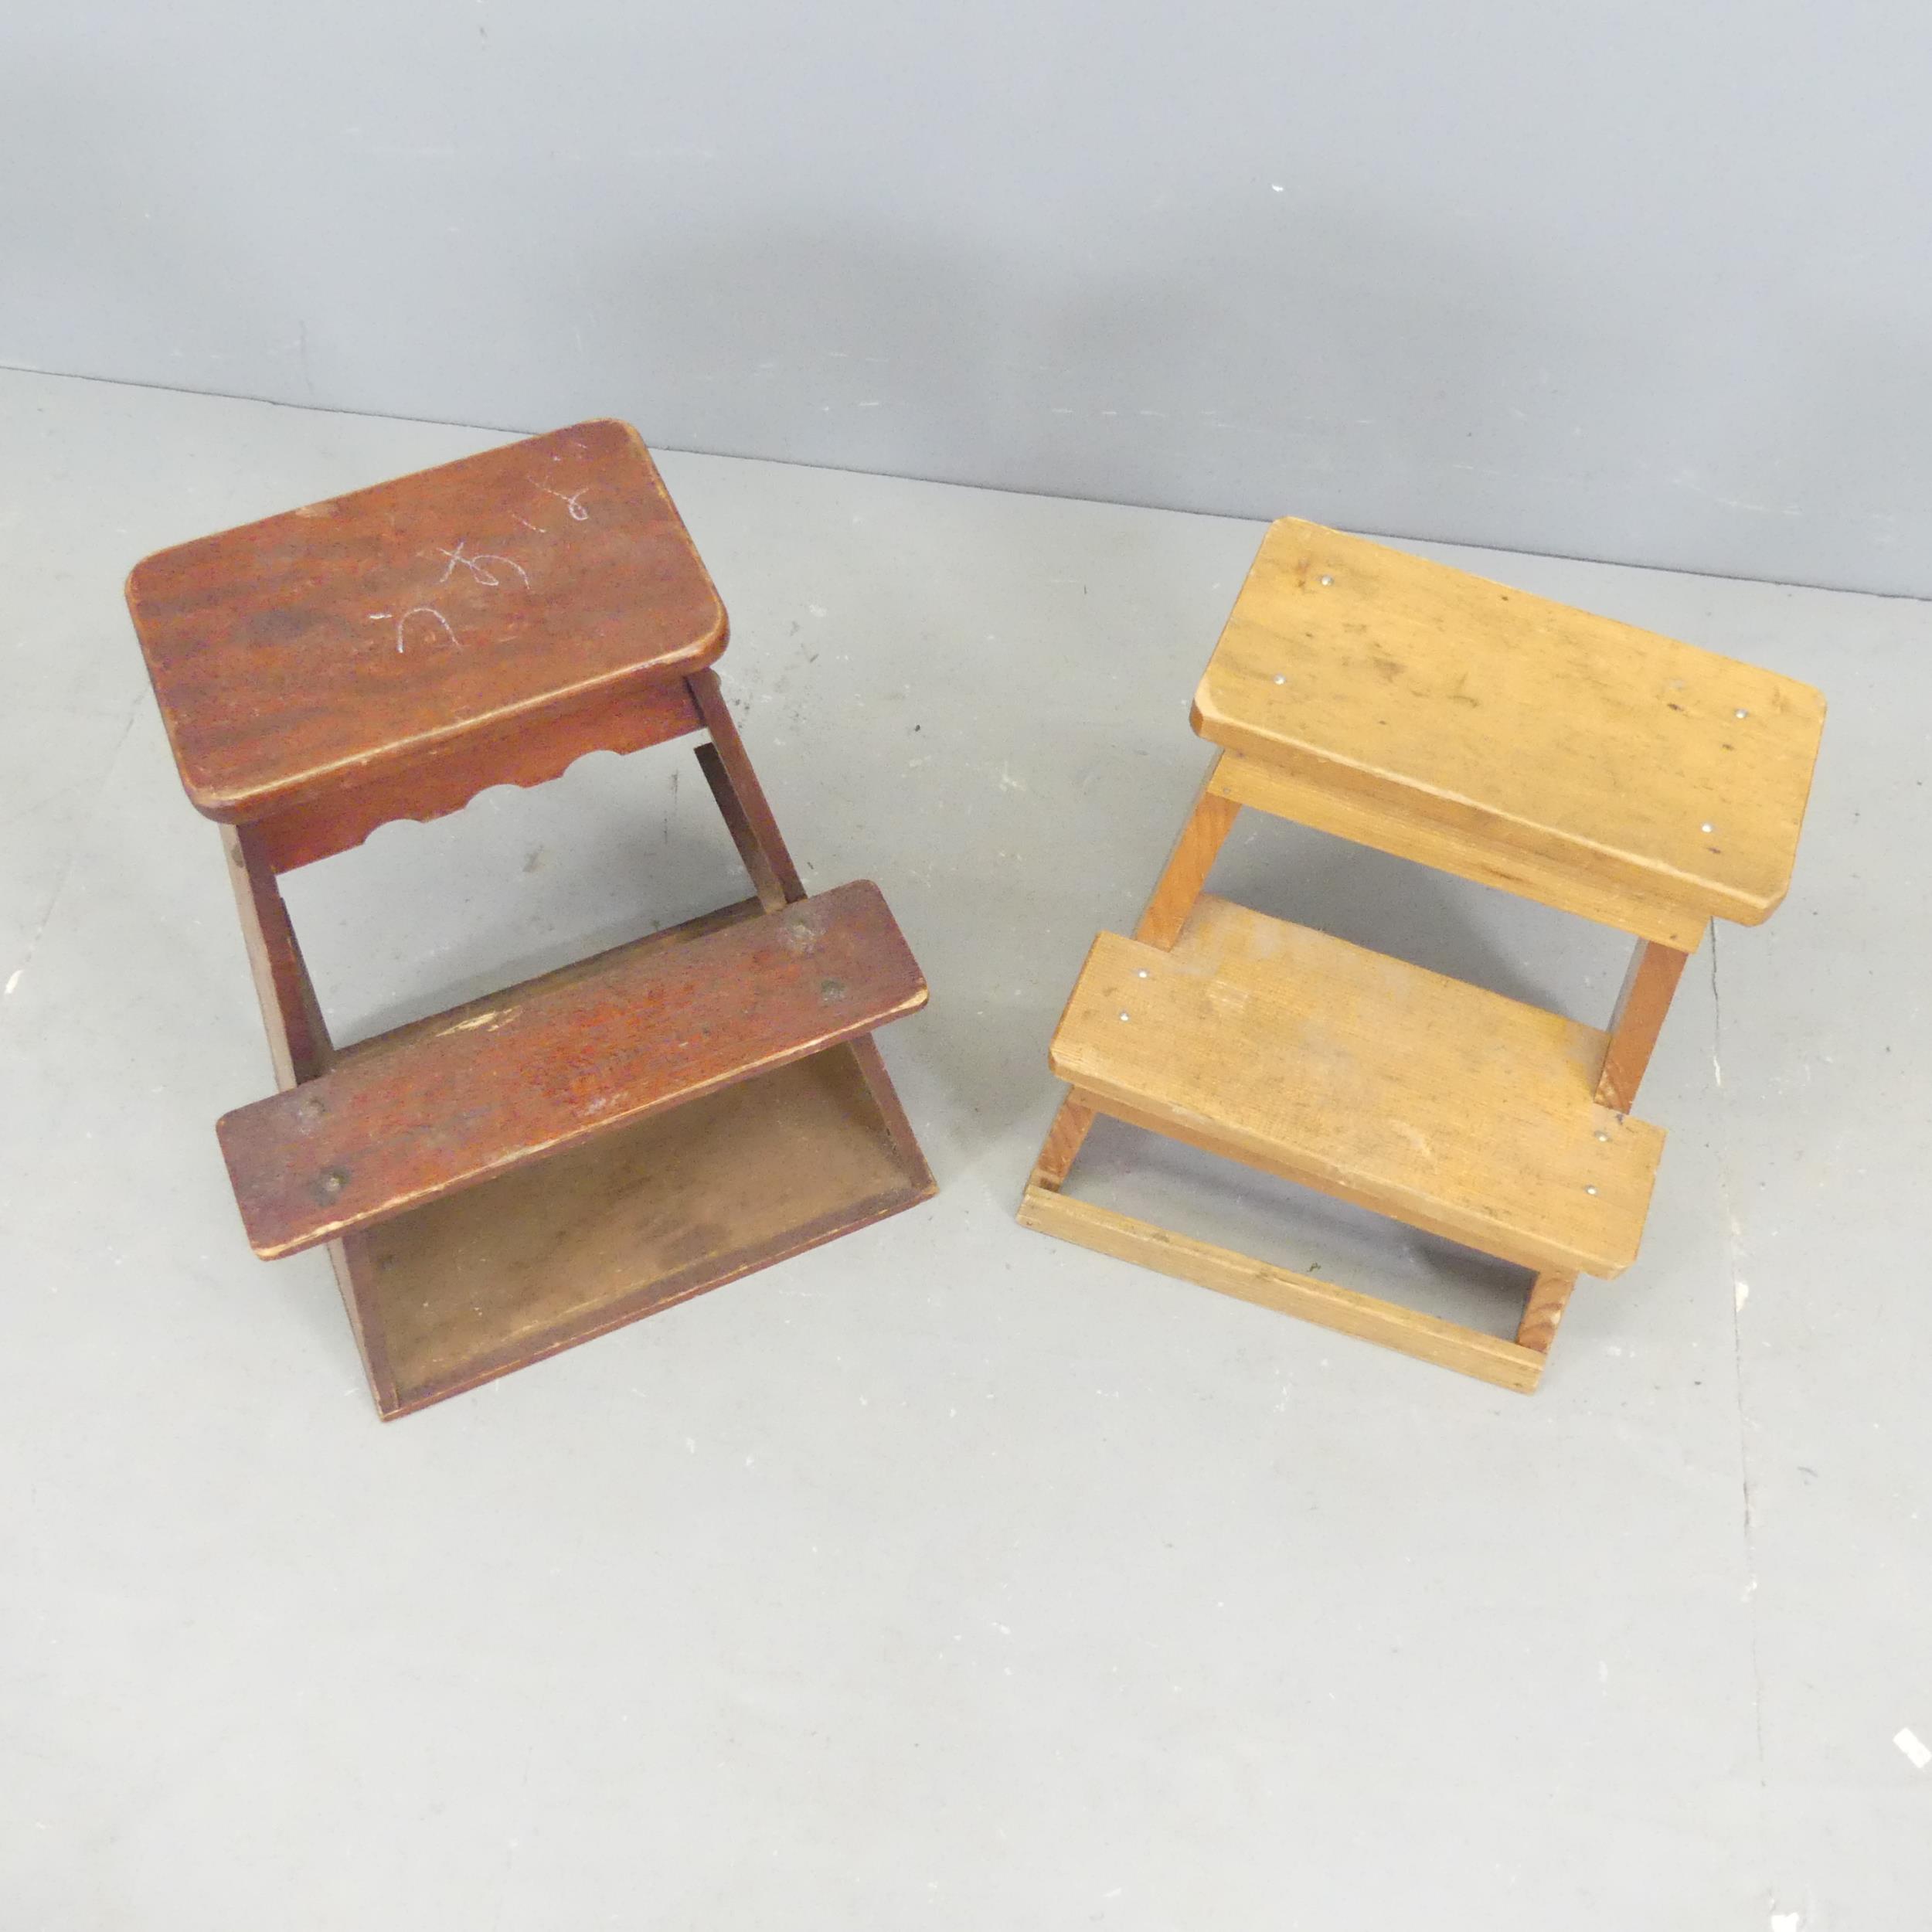 Two similar Japanese step stools. Tallest 39x64x27cm. No character marks. One constructed of - Image 2 of 2